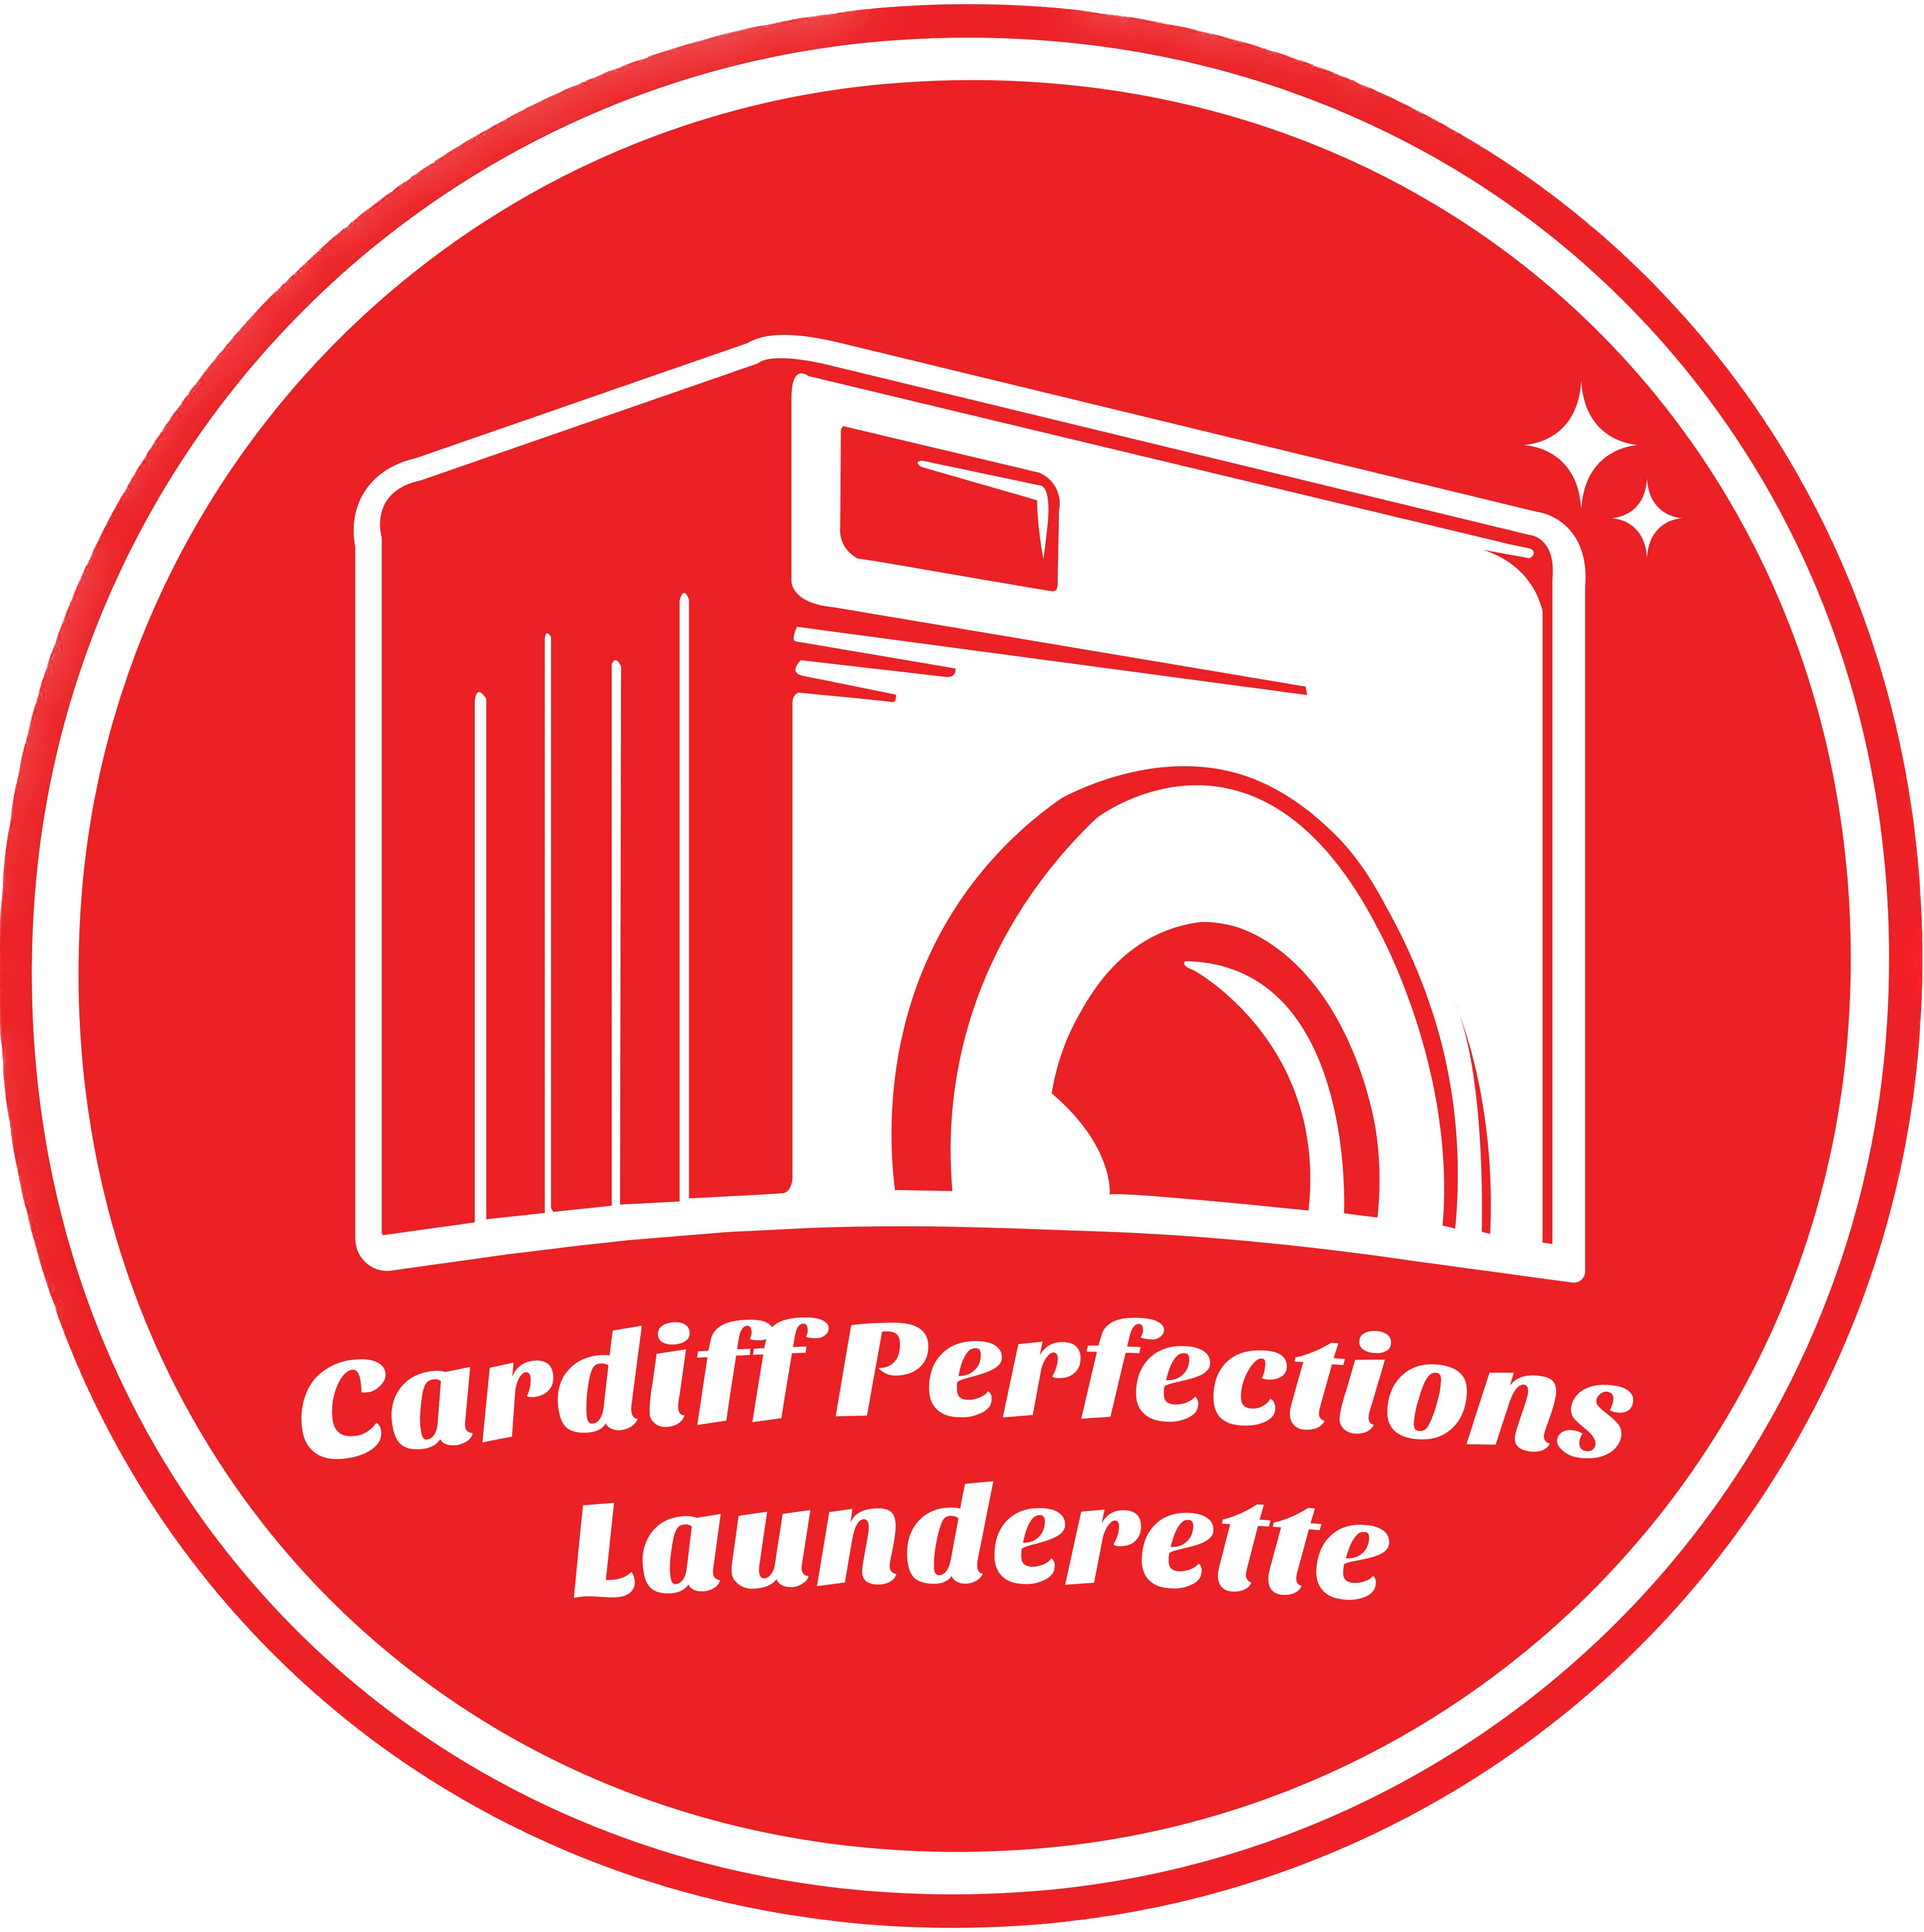 Cardiff Perfections Launderette